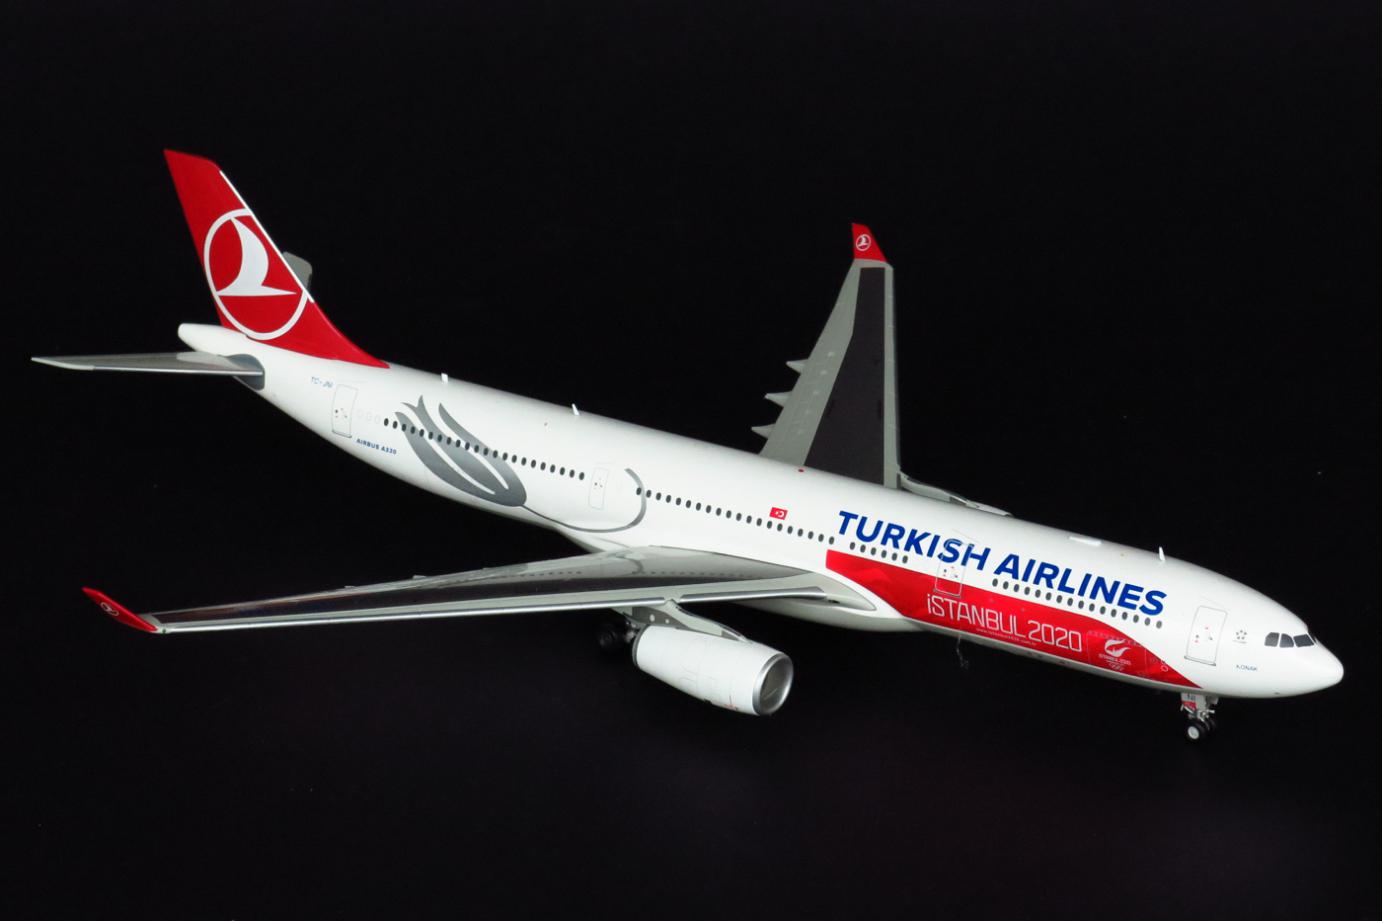    Airbus A330-300 "Istanbul 2020"